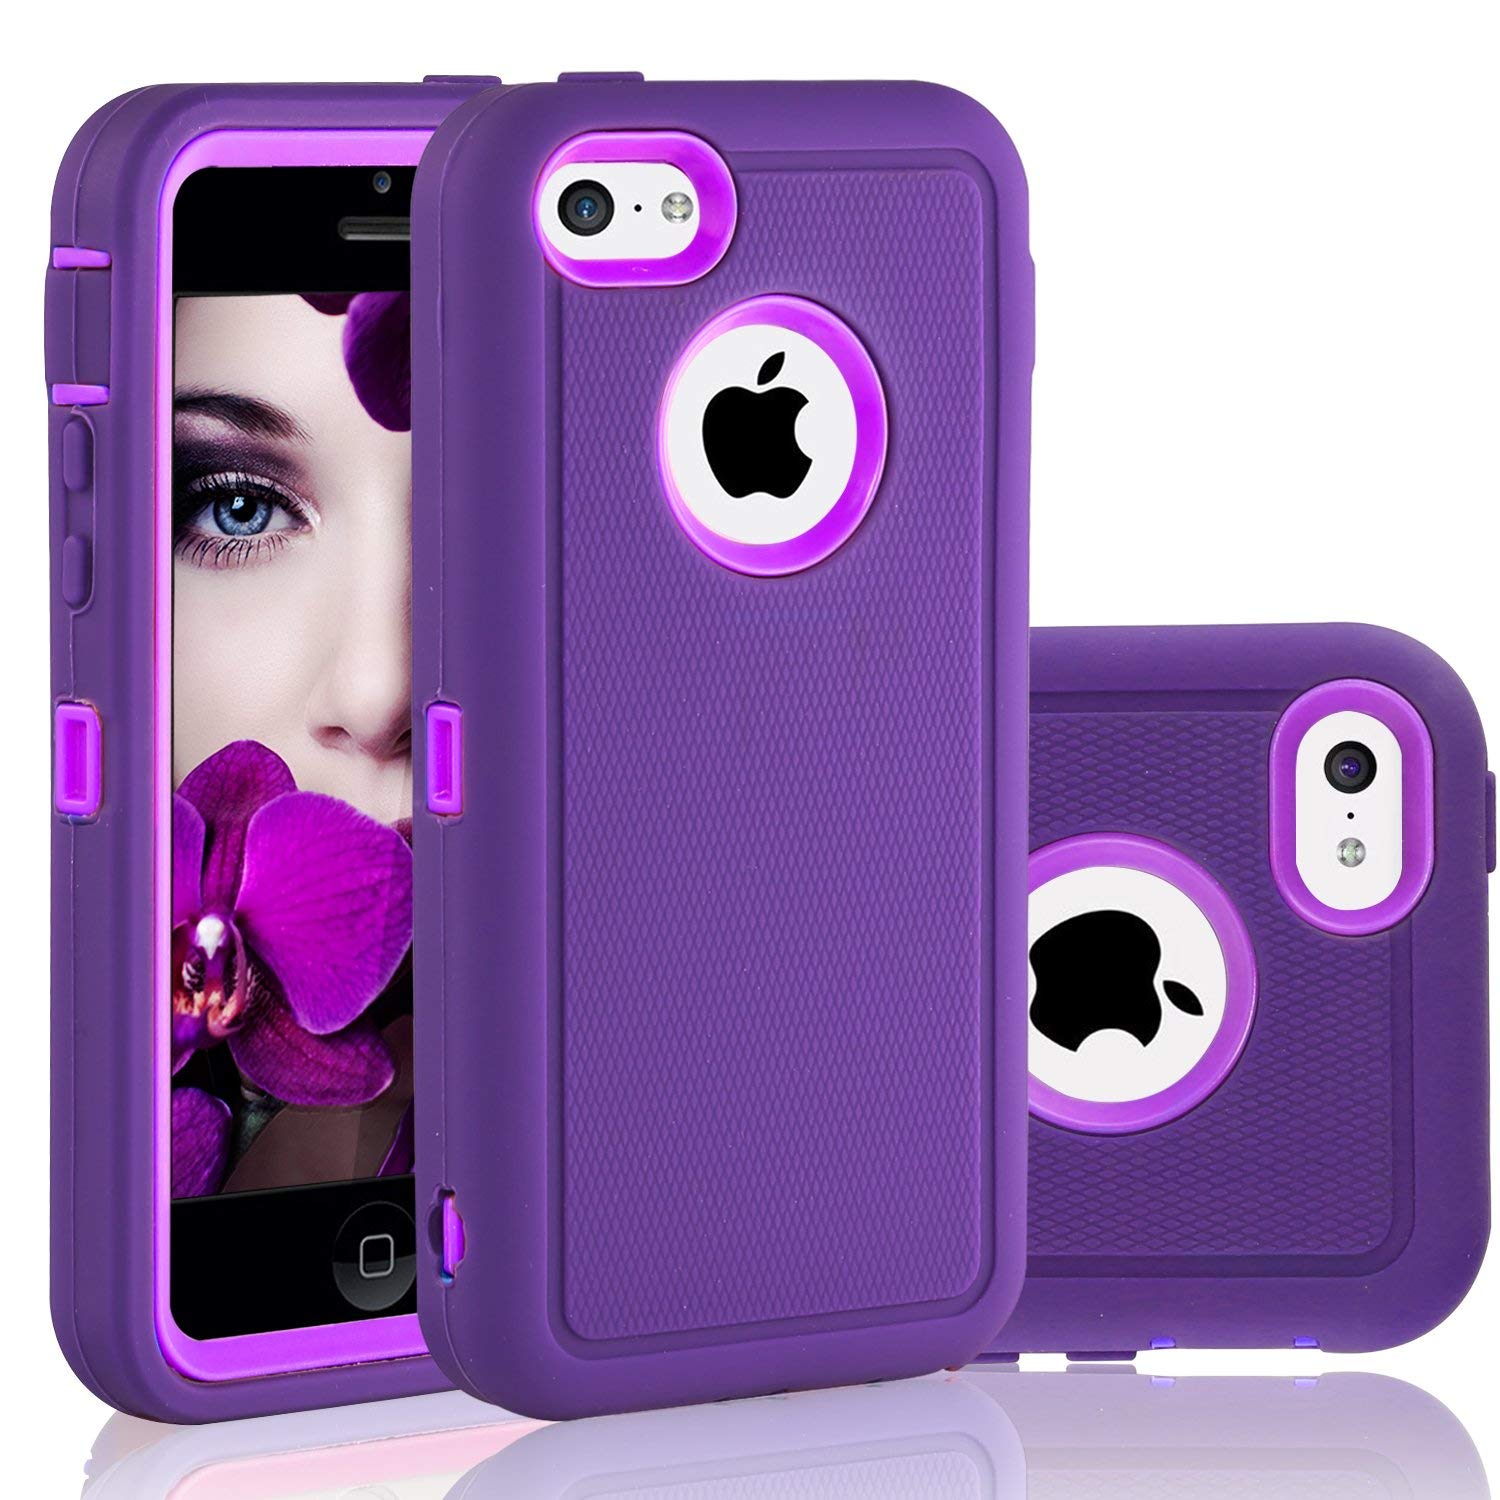 iPhone 5C Case, FOGEEK Dual Layer Anti Slip 360 Full Body Cover Case PC and TPU Shockproof Protective Compatible for Apple iPhone 5C ONLY(Purple)